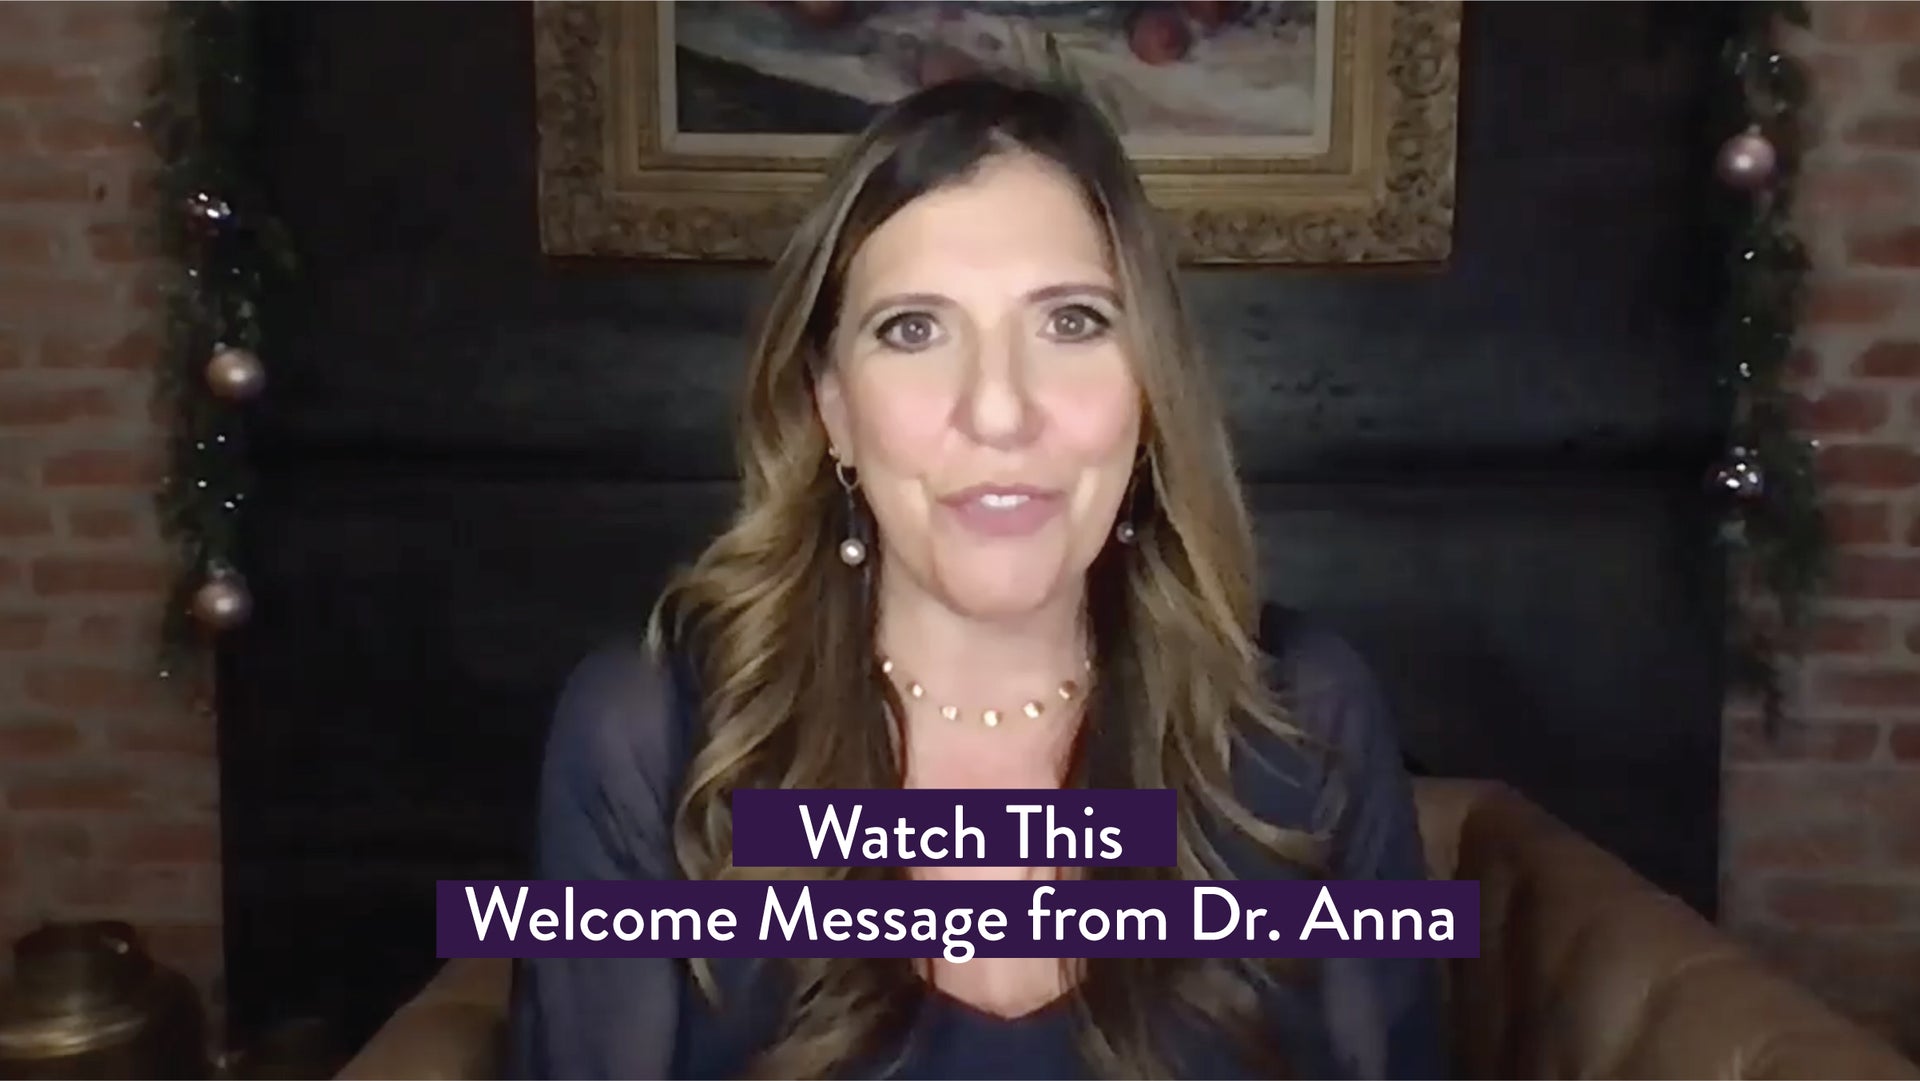 Load video: Watch this welcome message from Dr. Anna